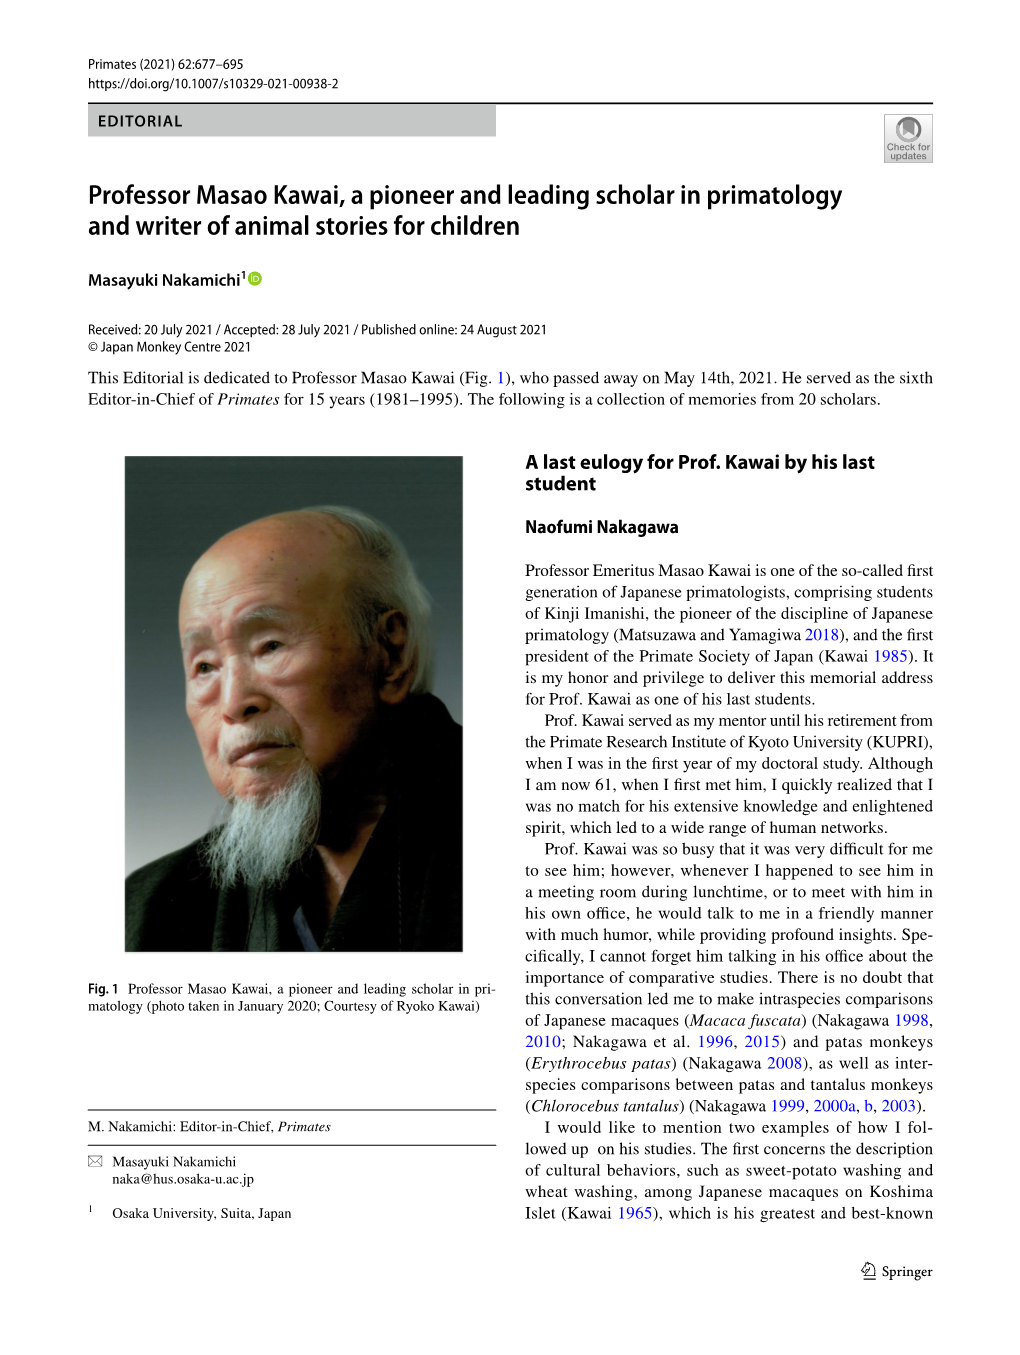 Professor Masao Kawai, a Pioneer and Leading Scholar in Primatology and Writer of Animal Stories for Children